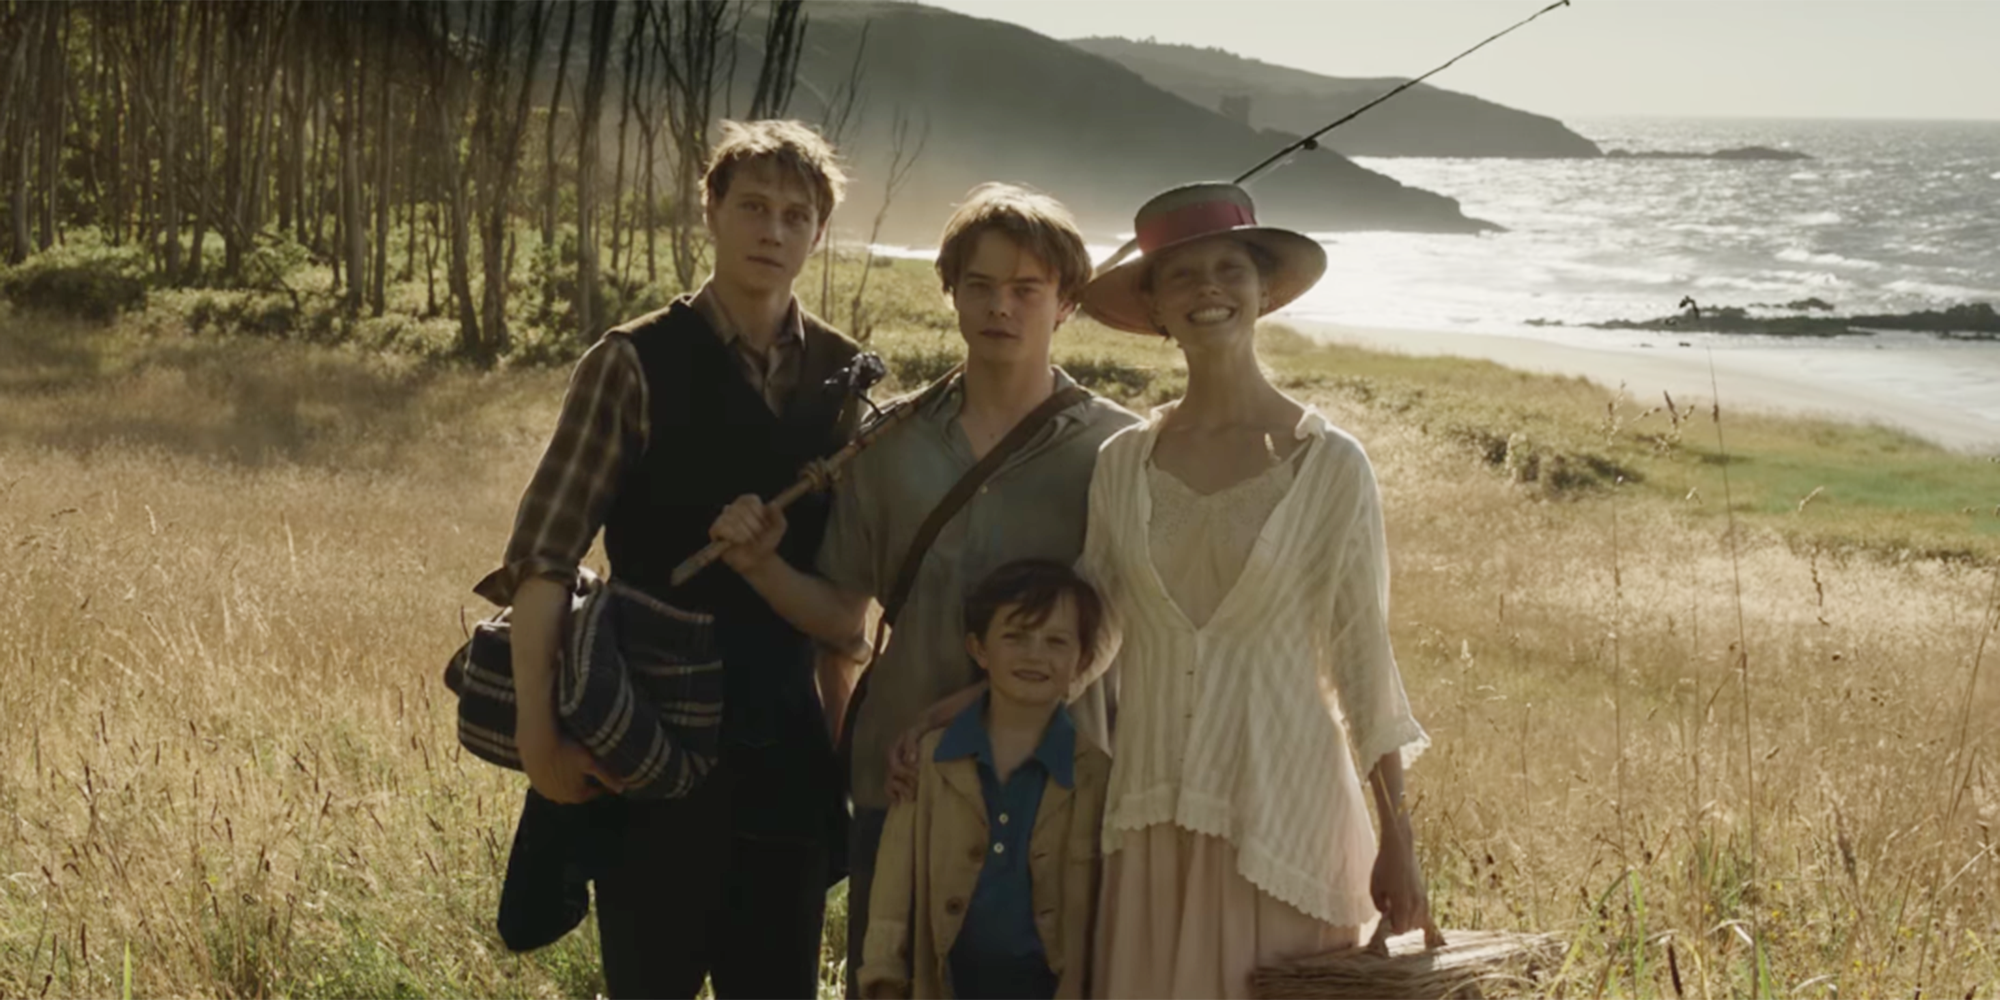 Marrowbone (2018) Blu-ray Review: A Cure for Insomnia - Cinema Sentries